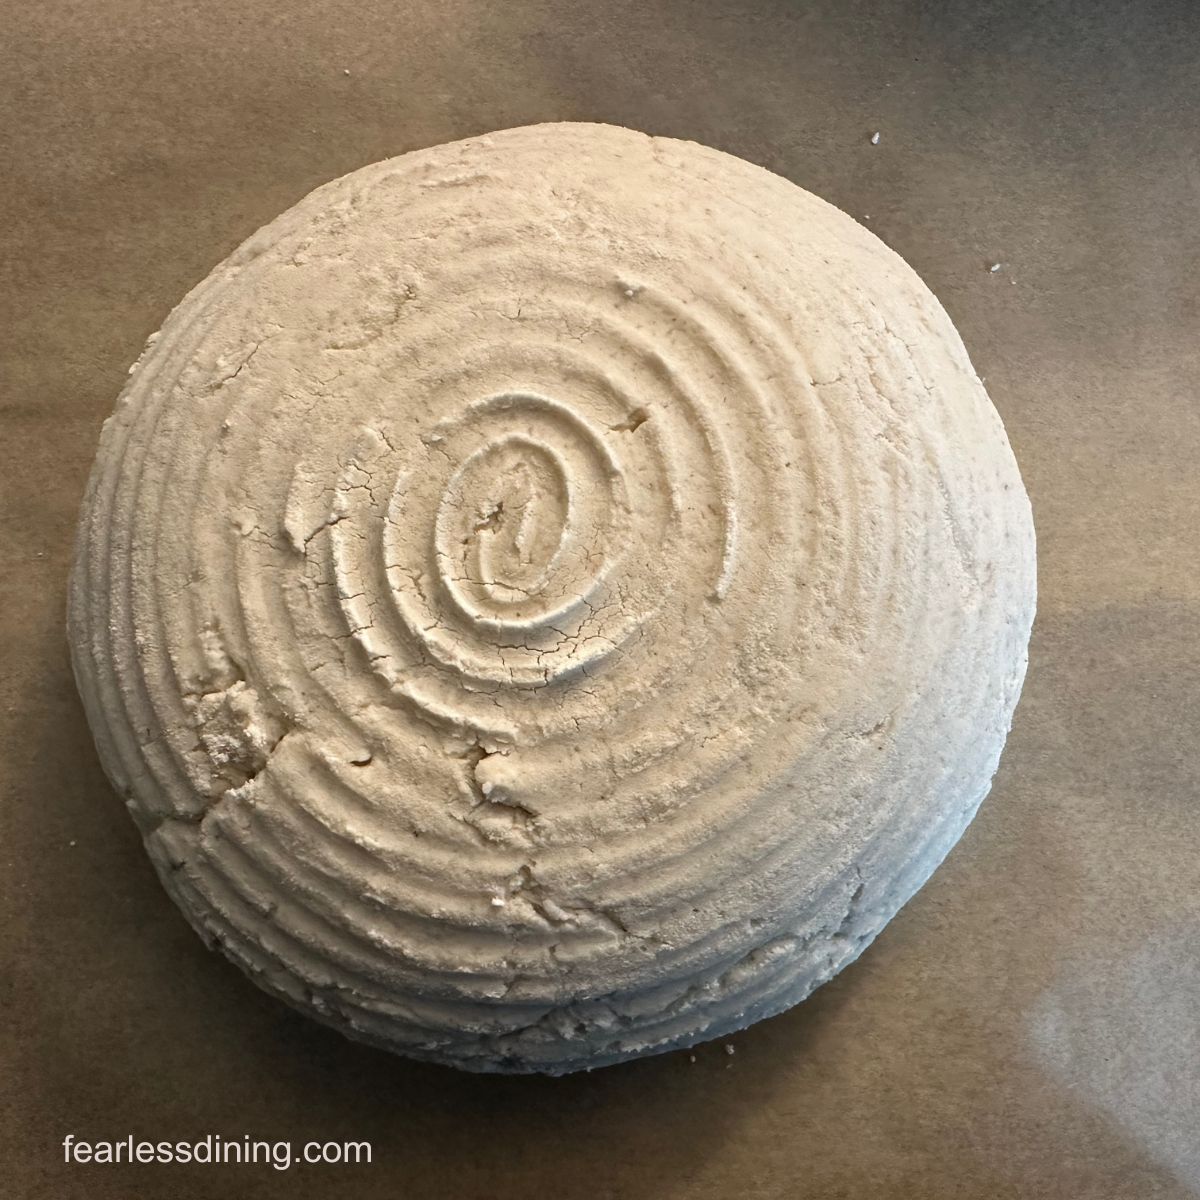 A boule of dough with the swirl markings from the banneton.